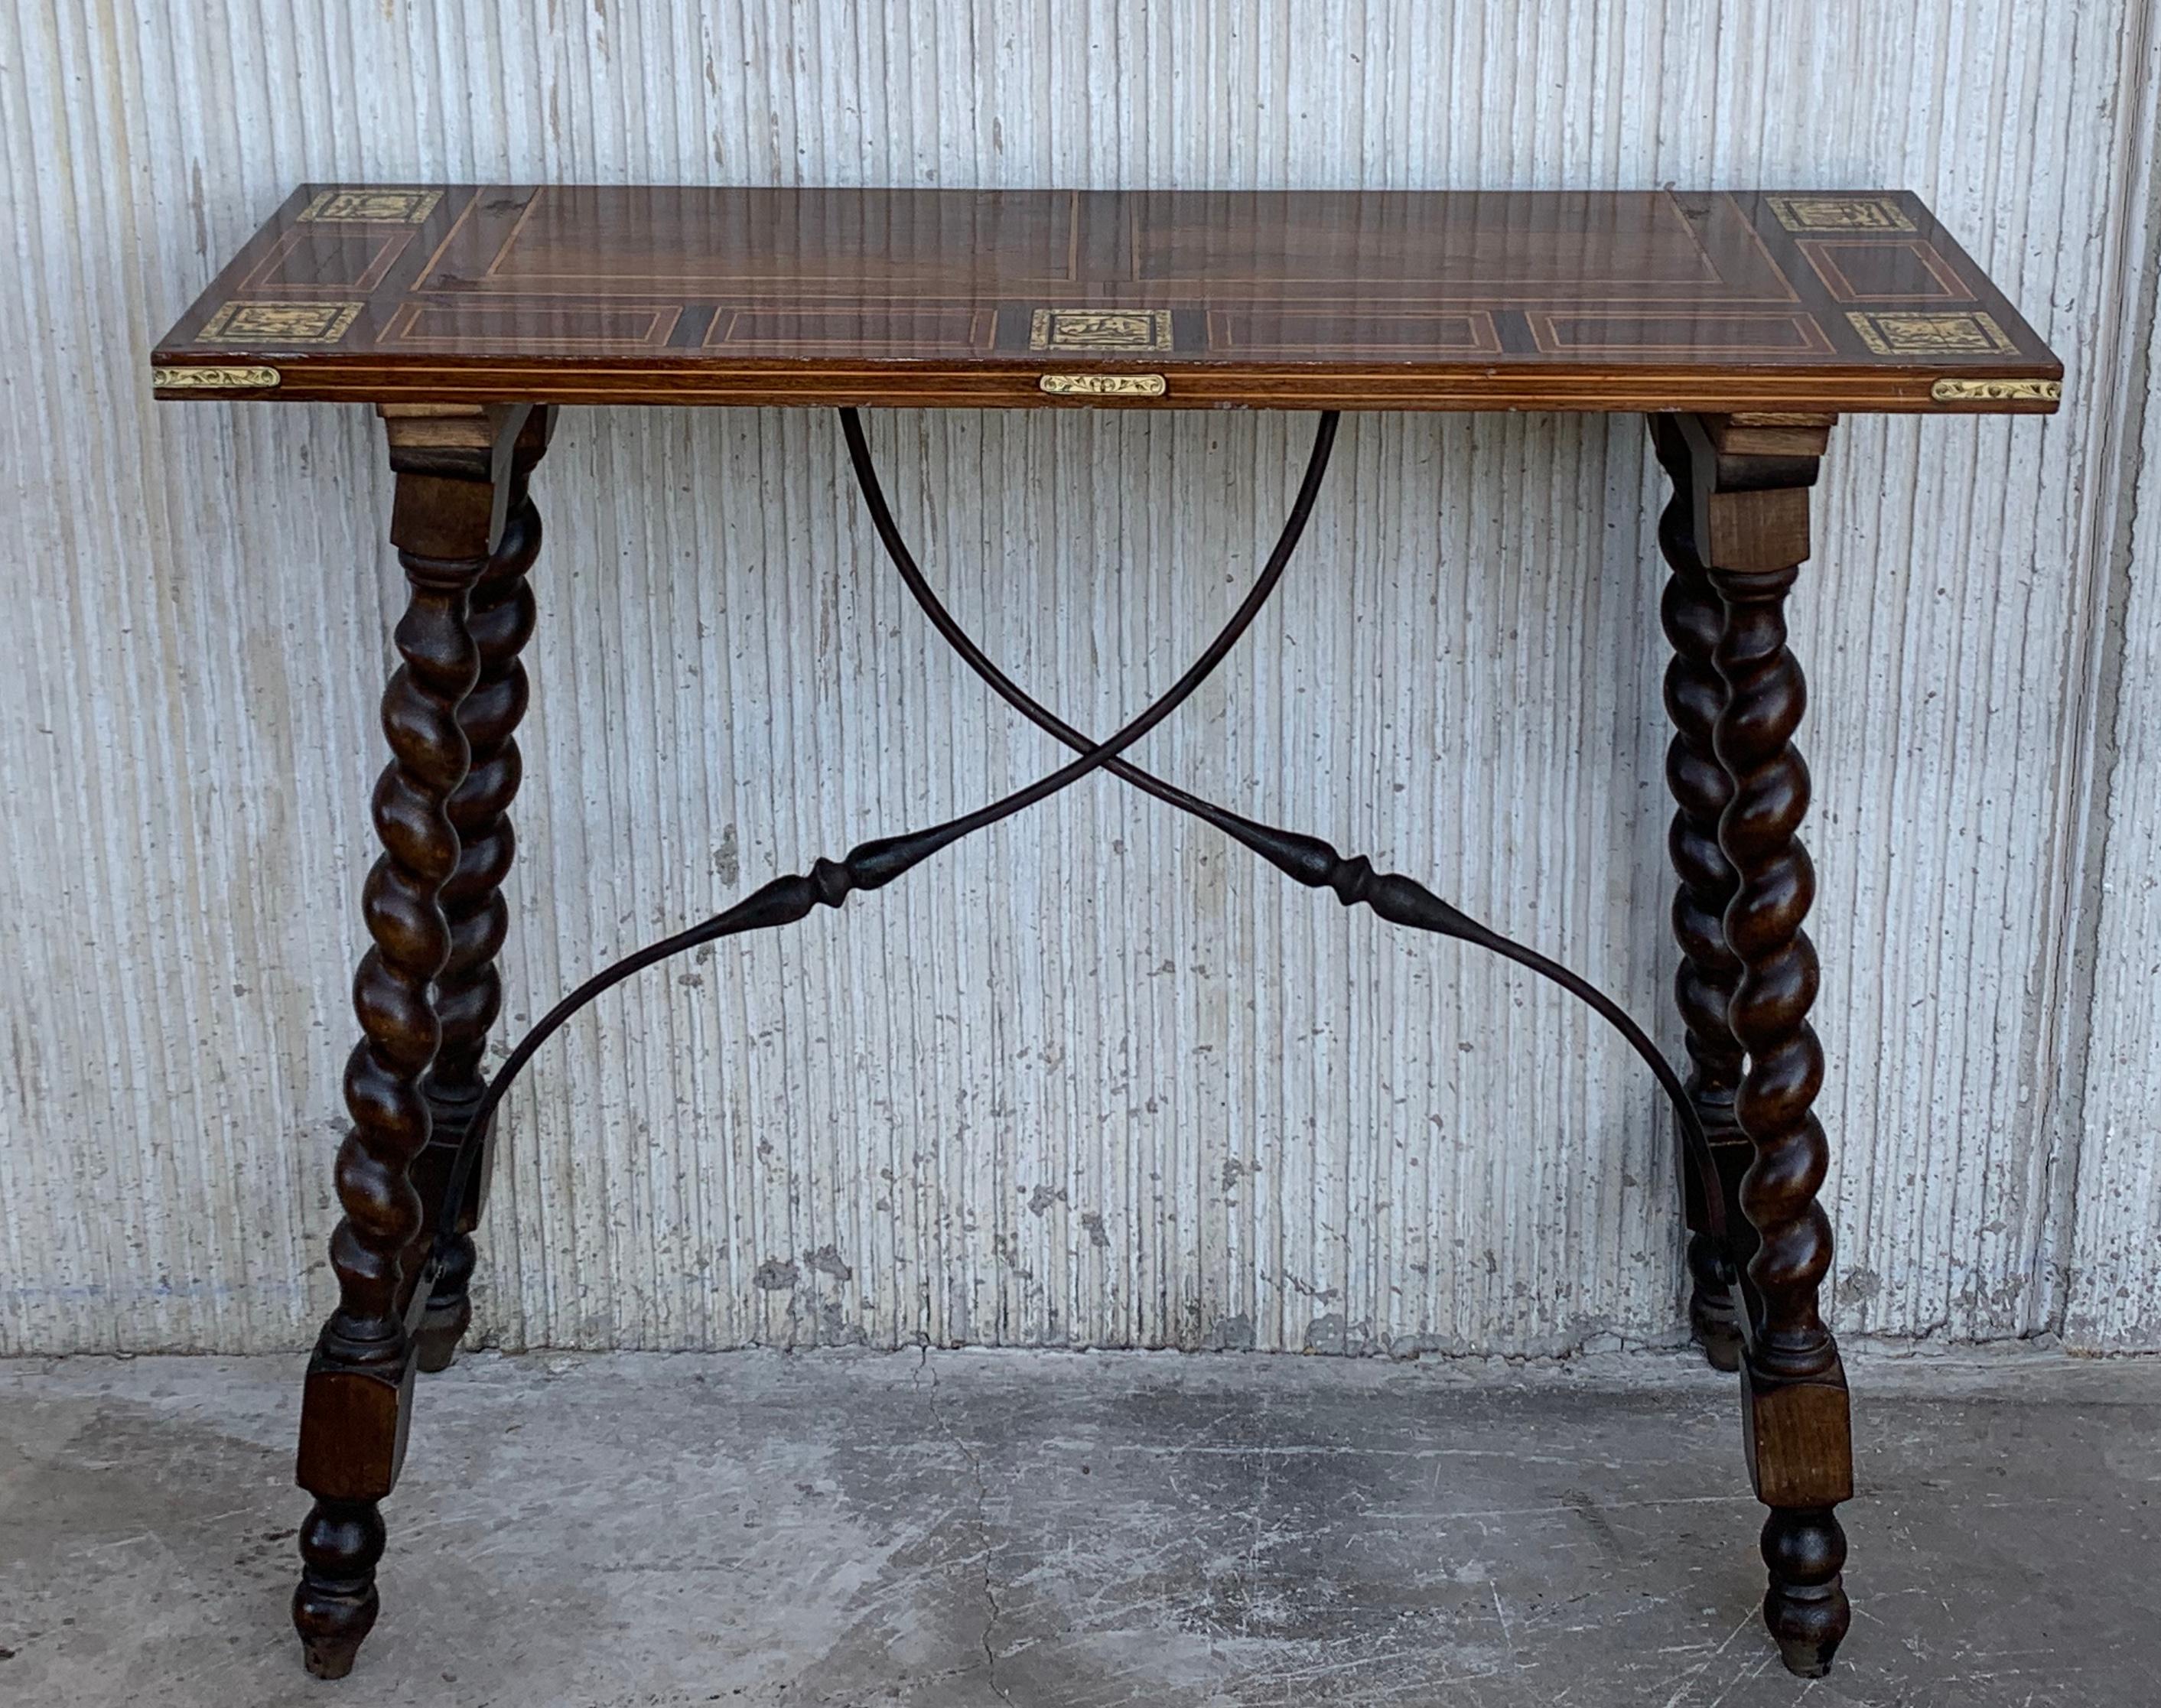 19th Century Salomonic Baroque Side Table with Inlays, Marquetry & Stretchers 8